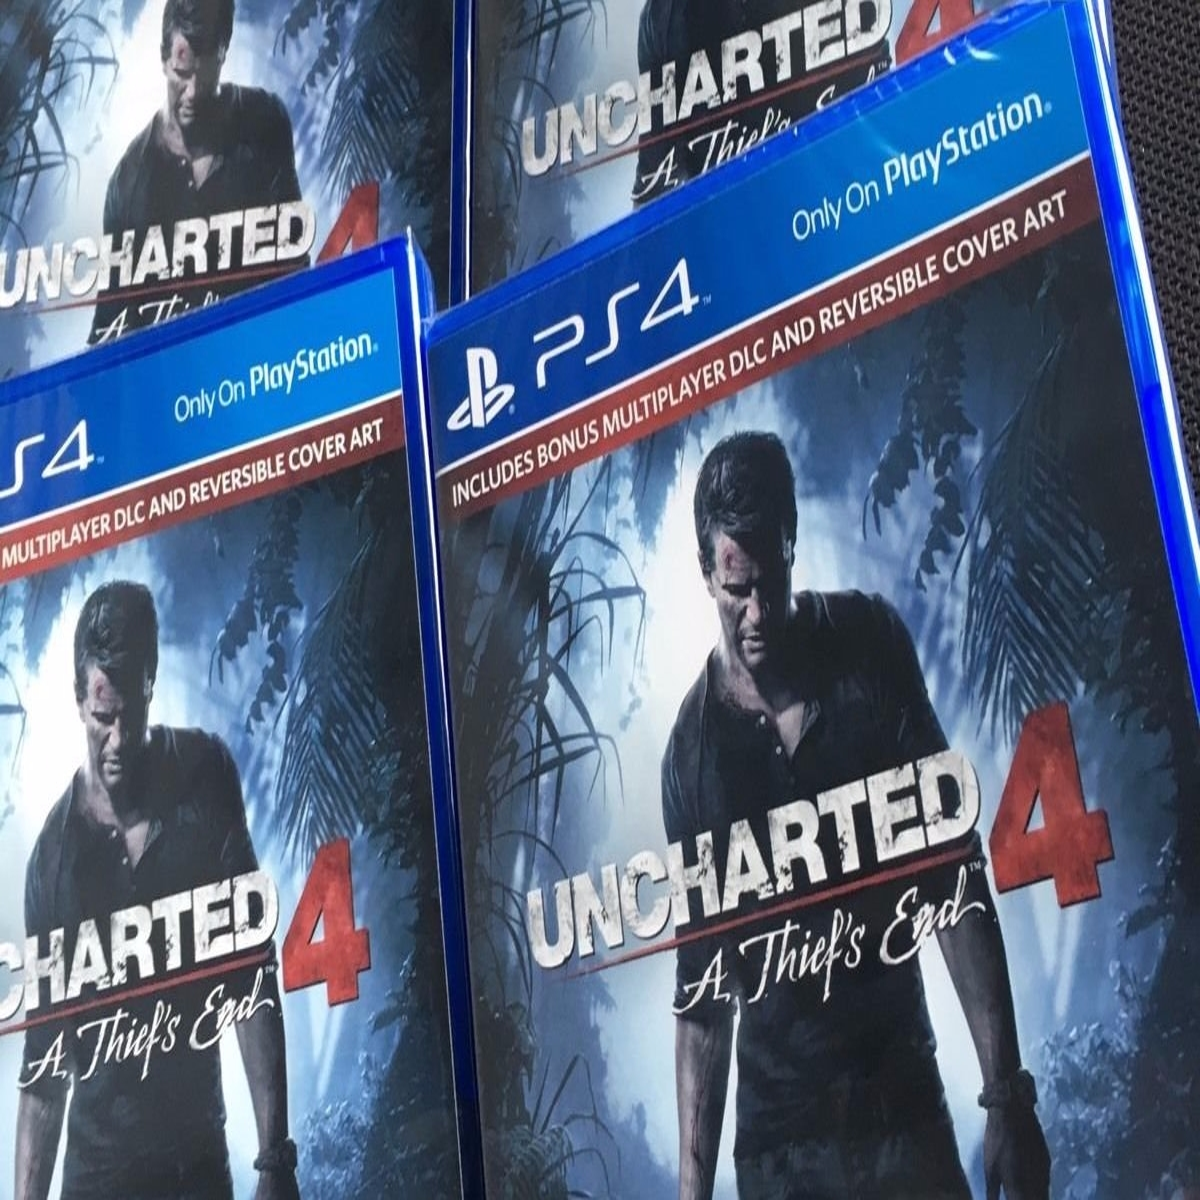 Uncharted 4 is coming to PC according to Sony report